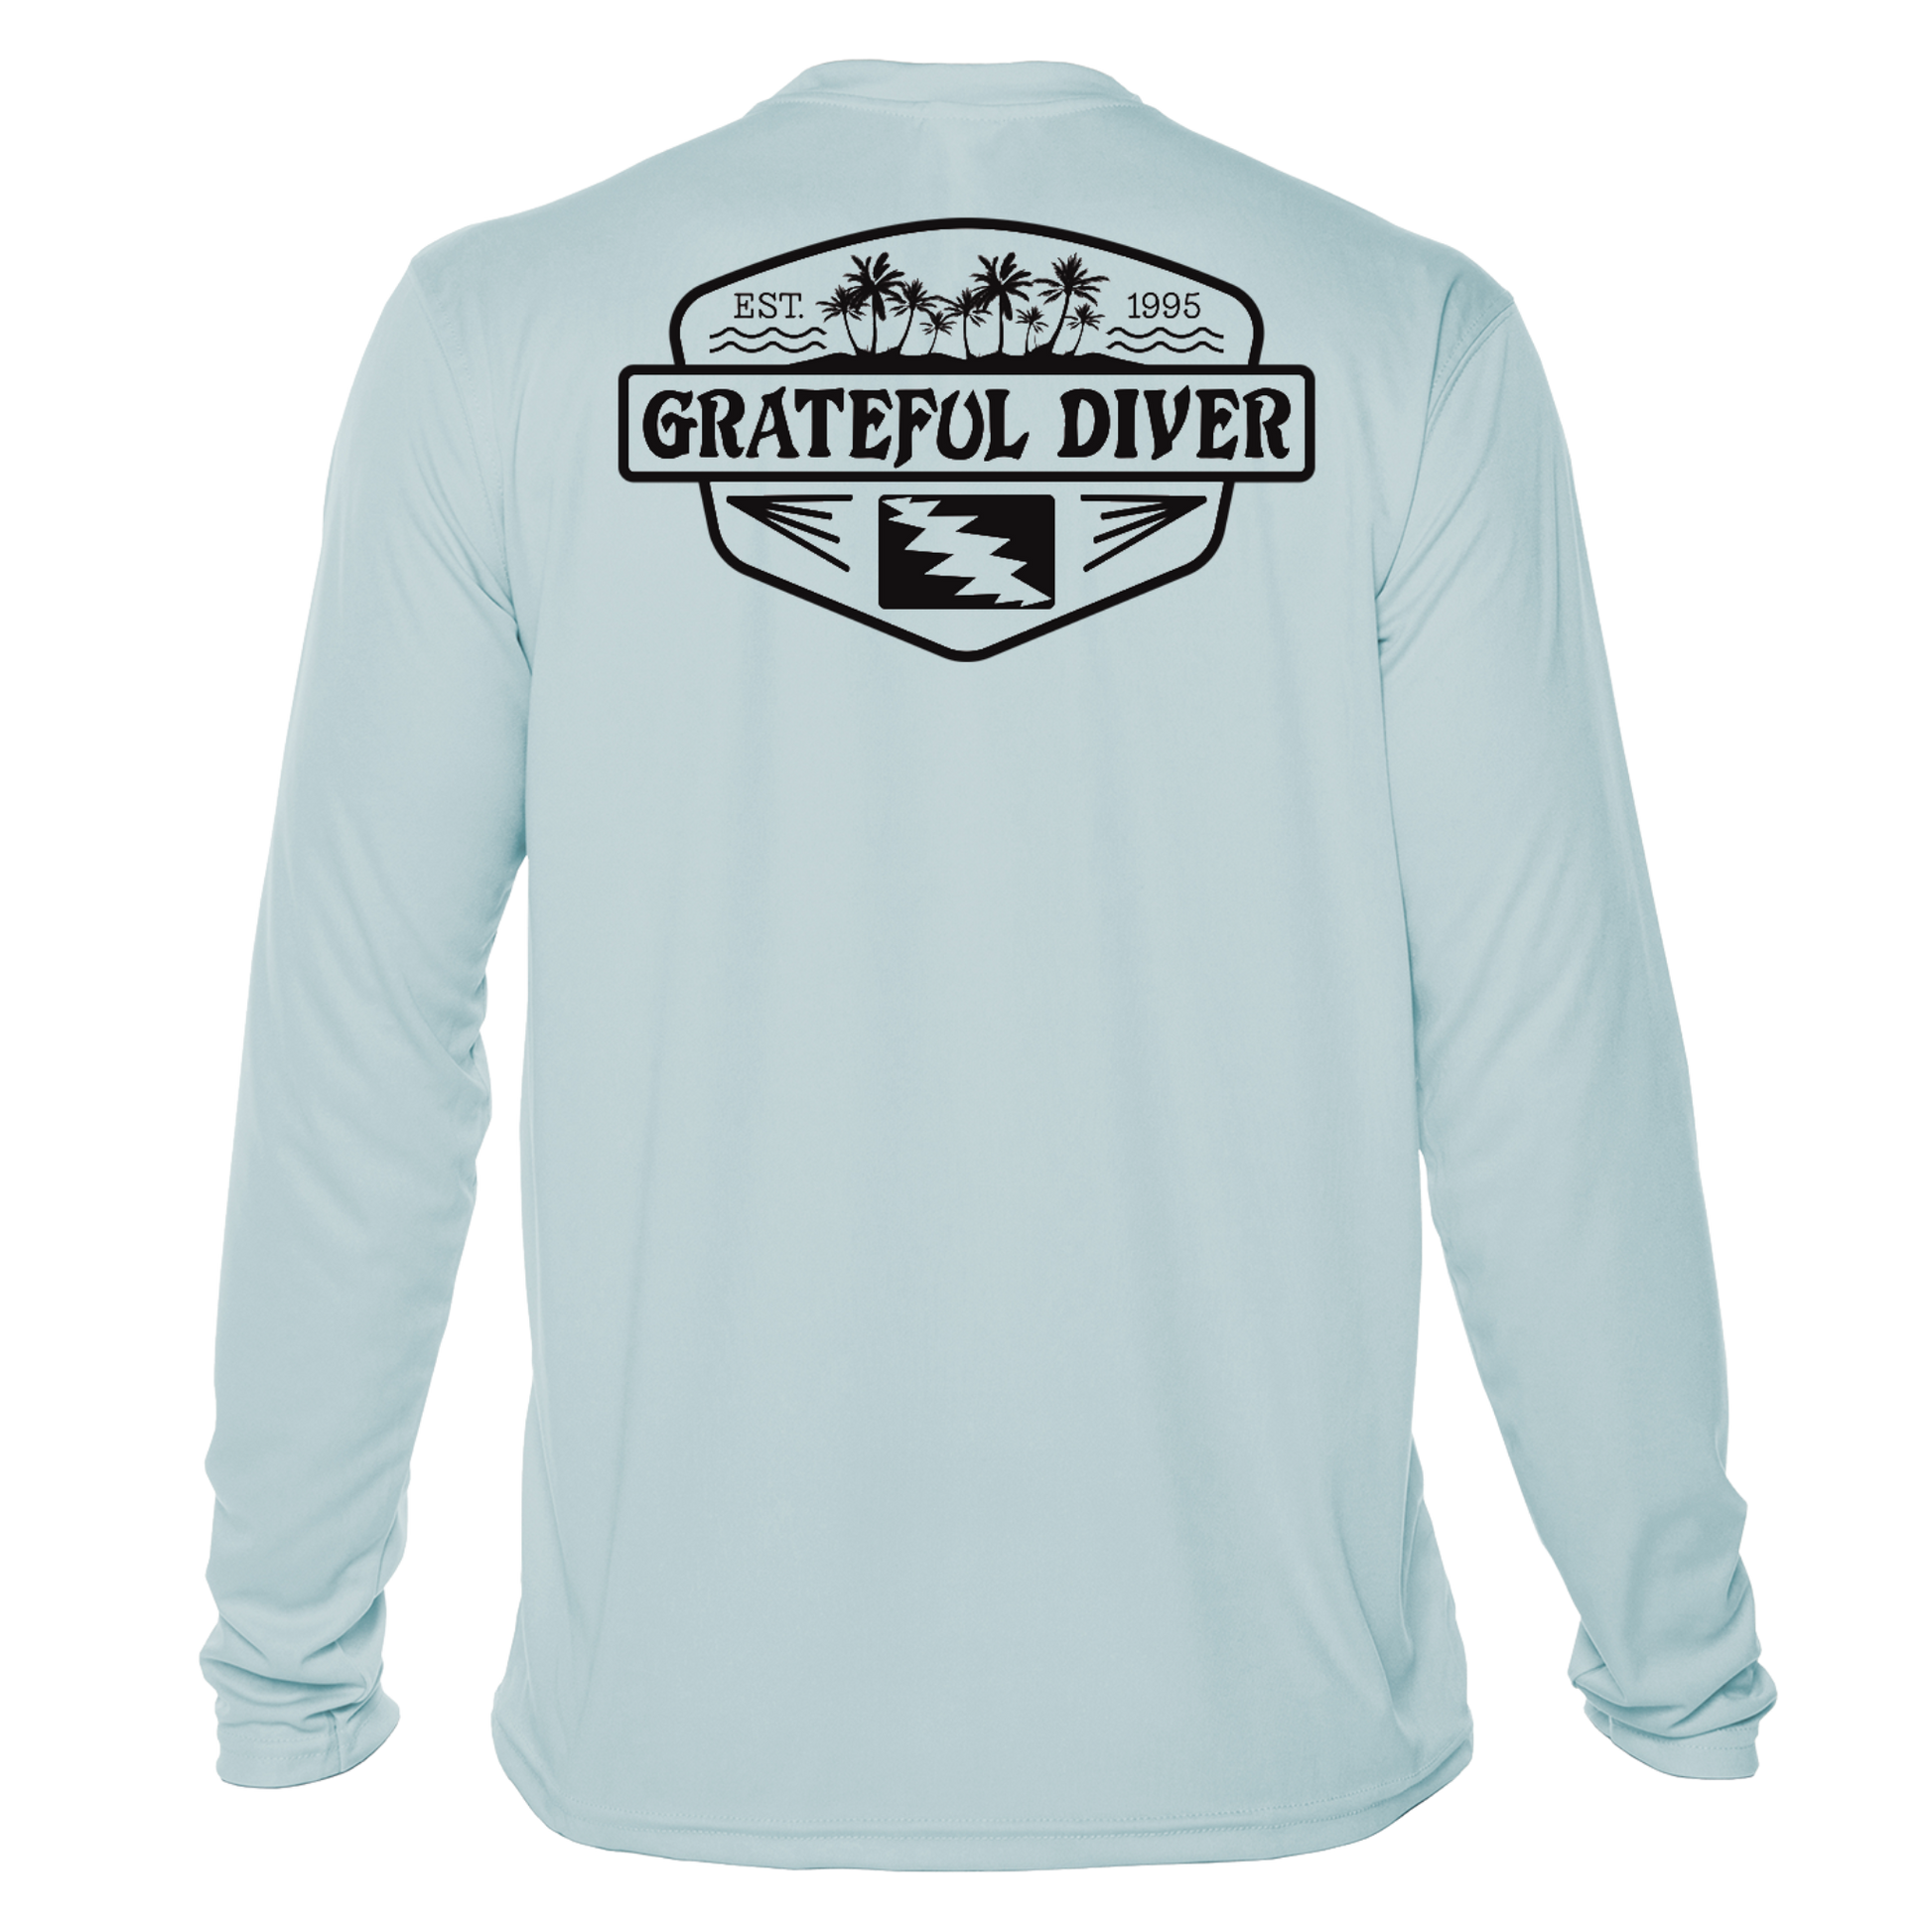 Grateful Diver Palm Tree UV Shirt in arctic blue showing the back off figure